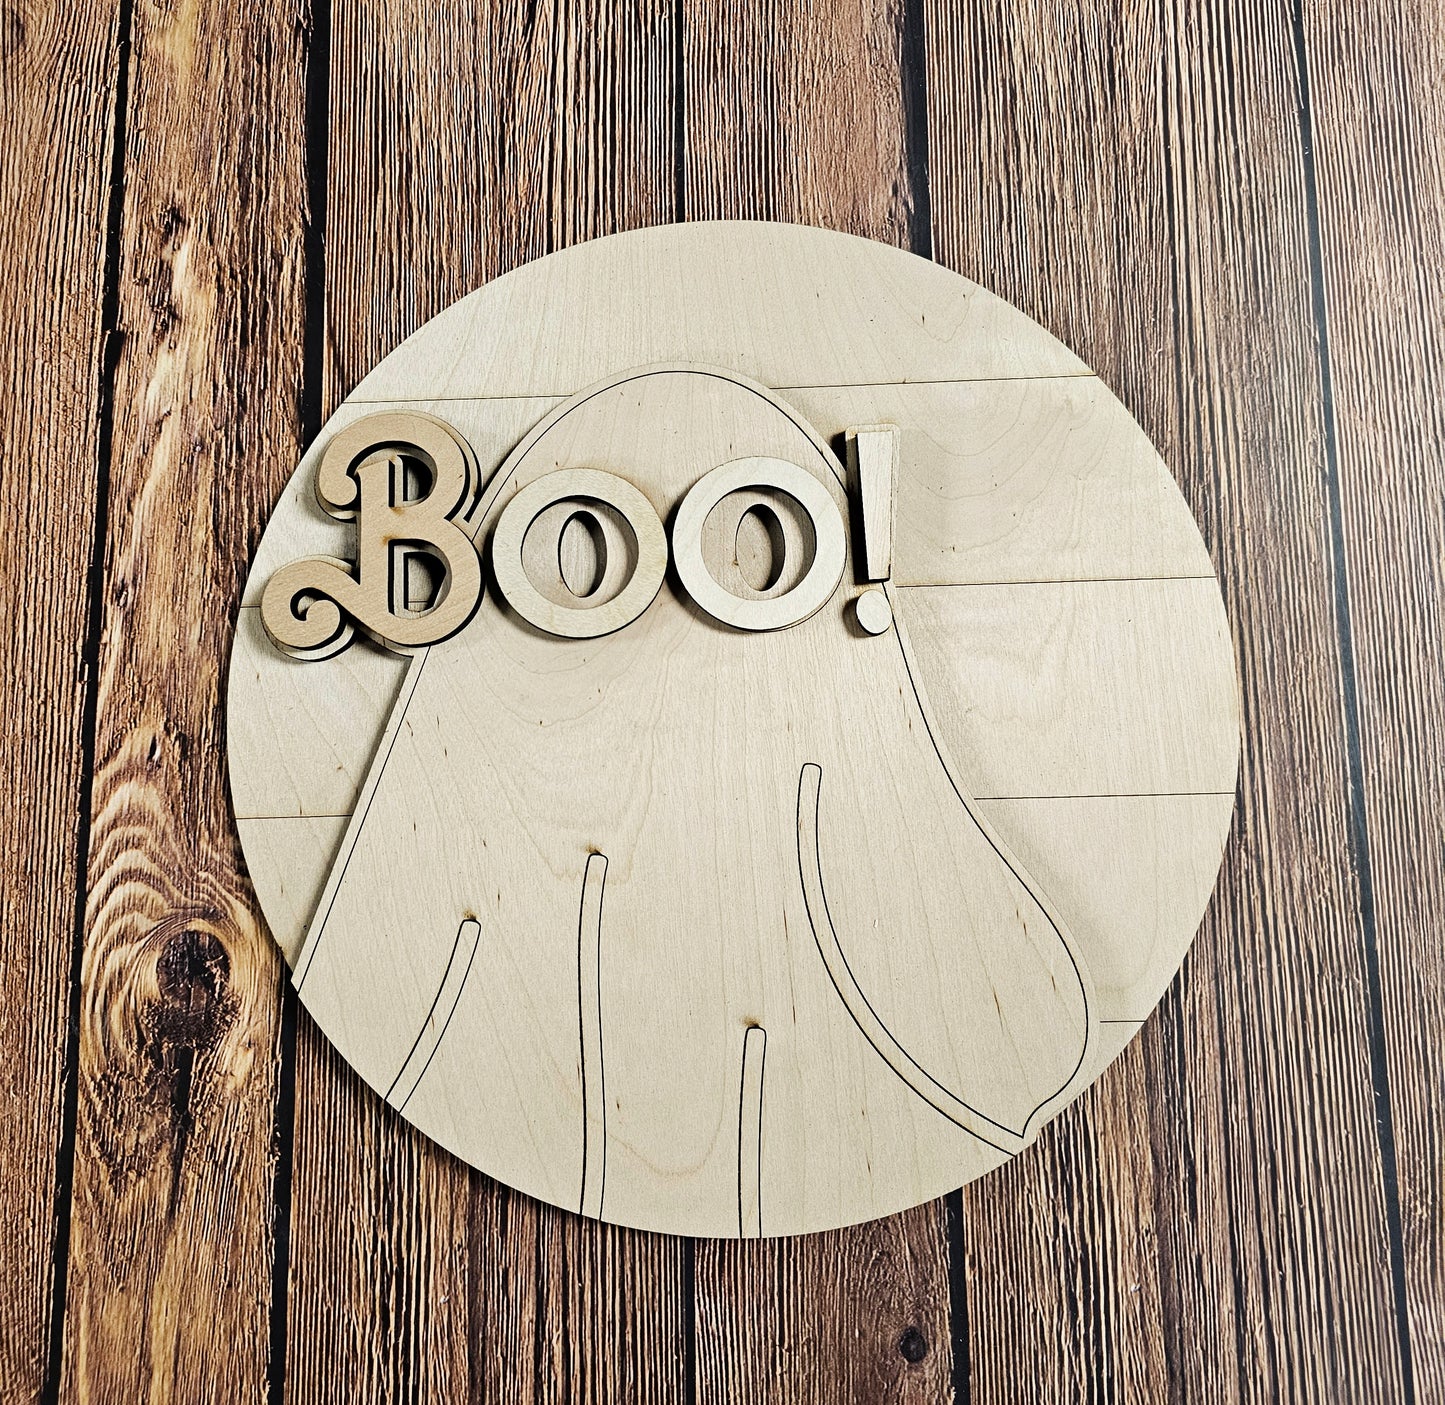 Boo round tabletop sign